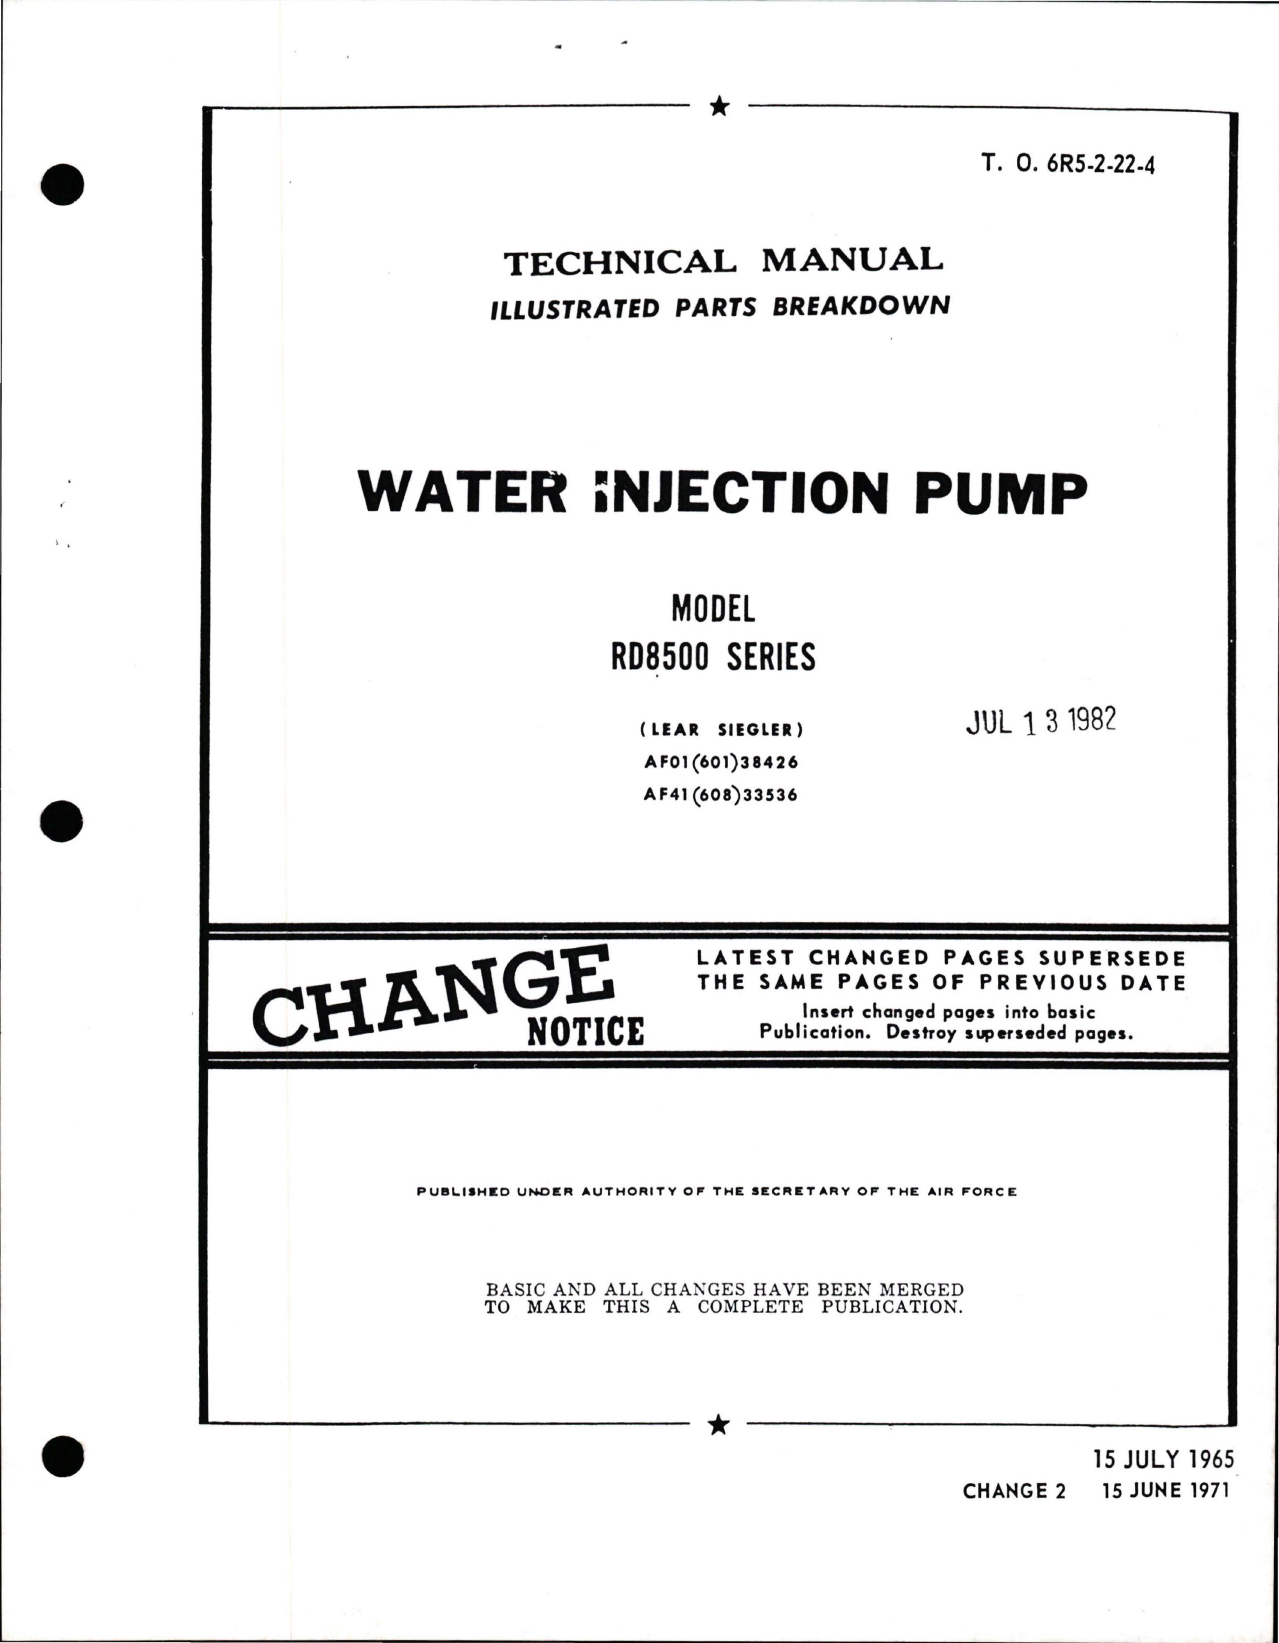 Sample page 1 from AirCorps Library document: Illustrated Parts Breakdown for Water Injection Pump - Model RD8500 Series 